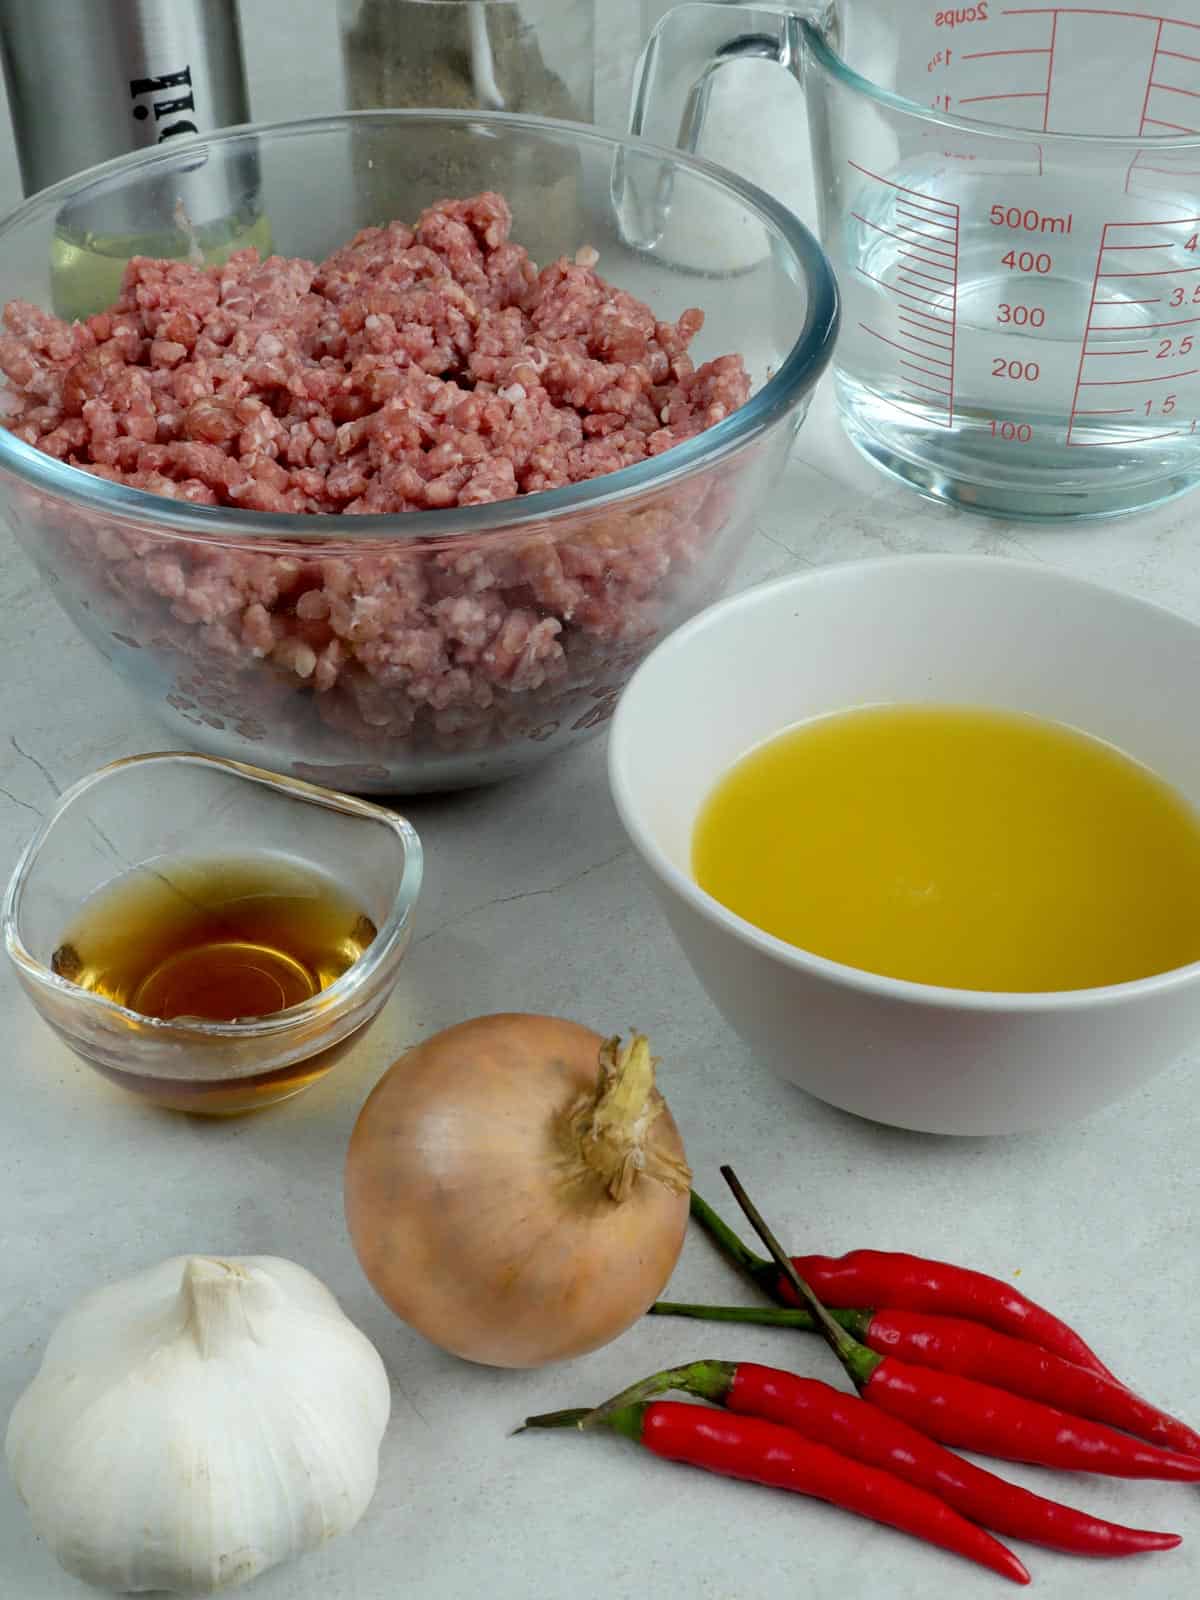 ground beef, calamansi juice, onion, garlic, chili peppers, fish sauce, water in bowls